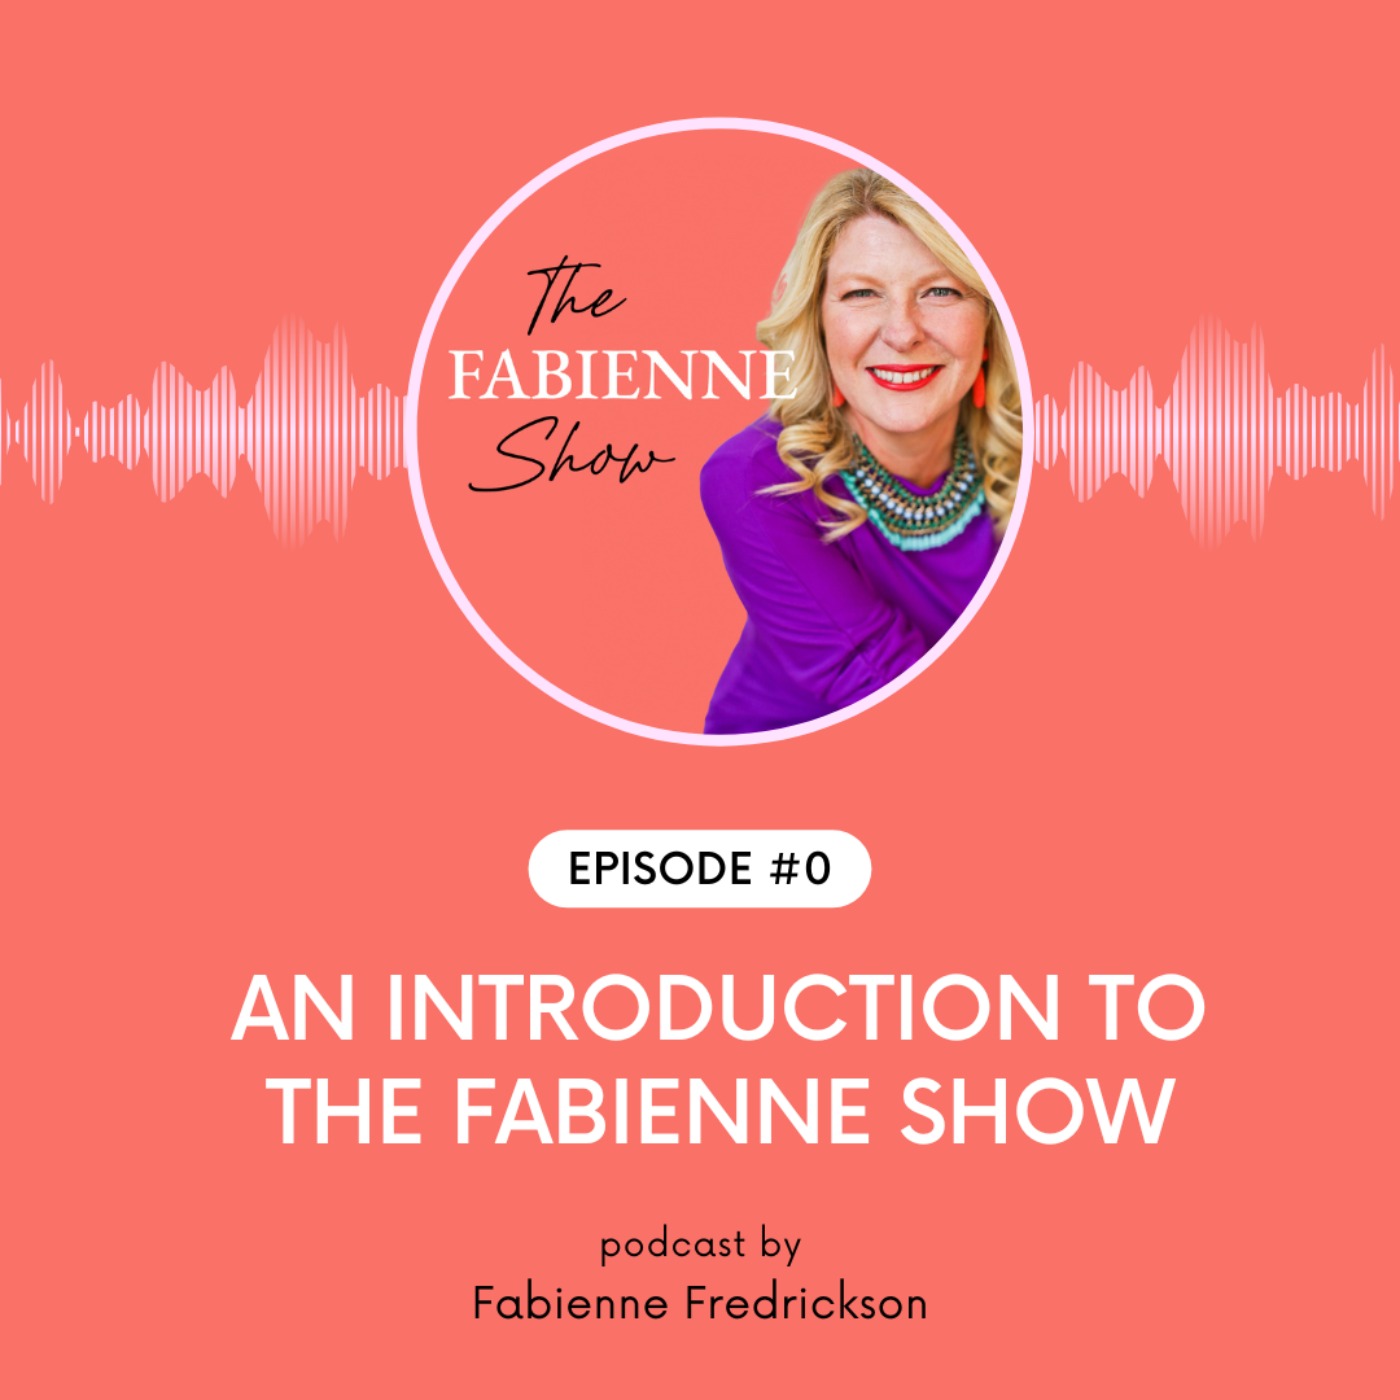 An Introduction to The Fabienne Show